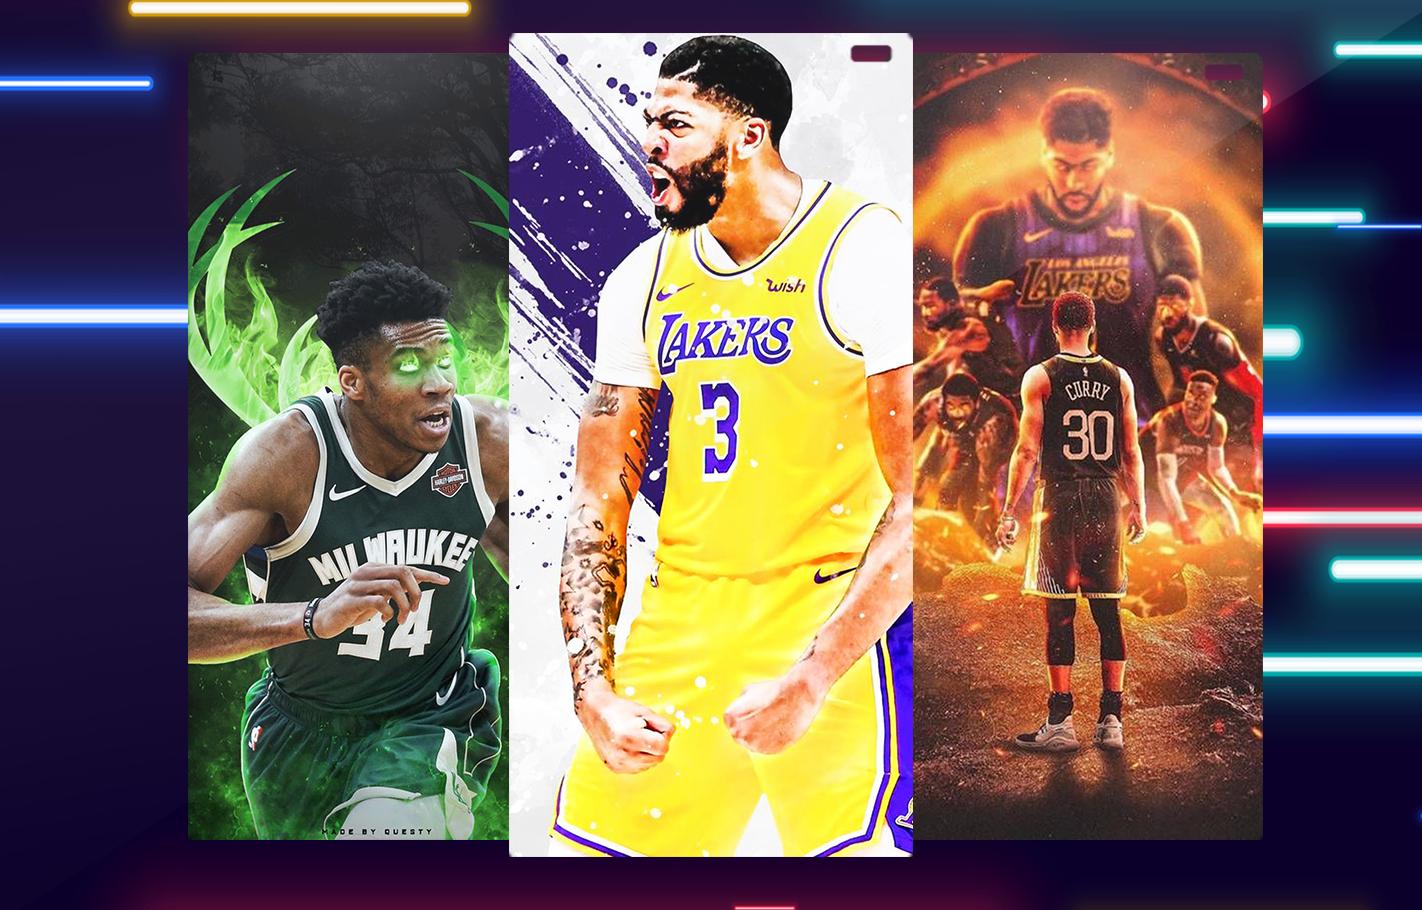 NBA Wallpaper 4K 2021 for Android